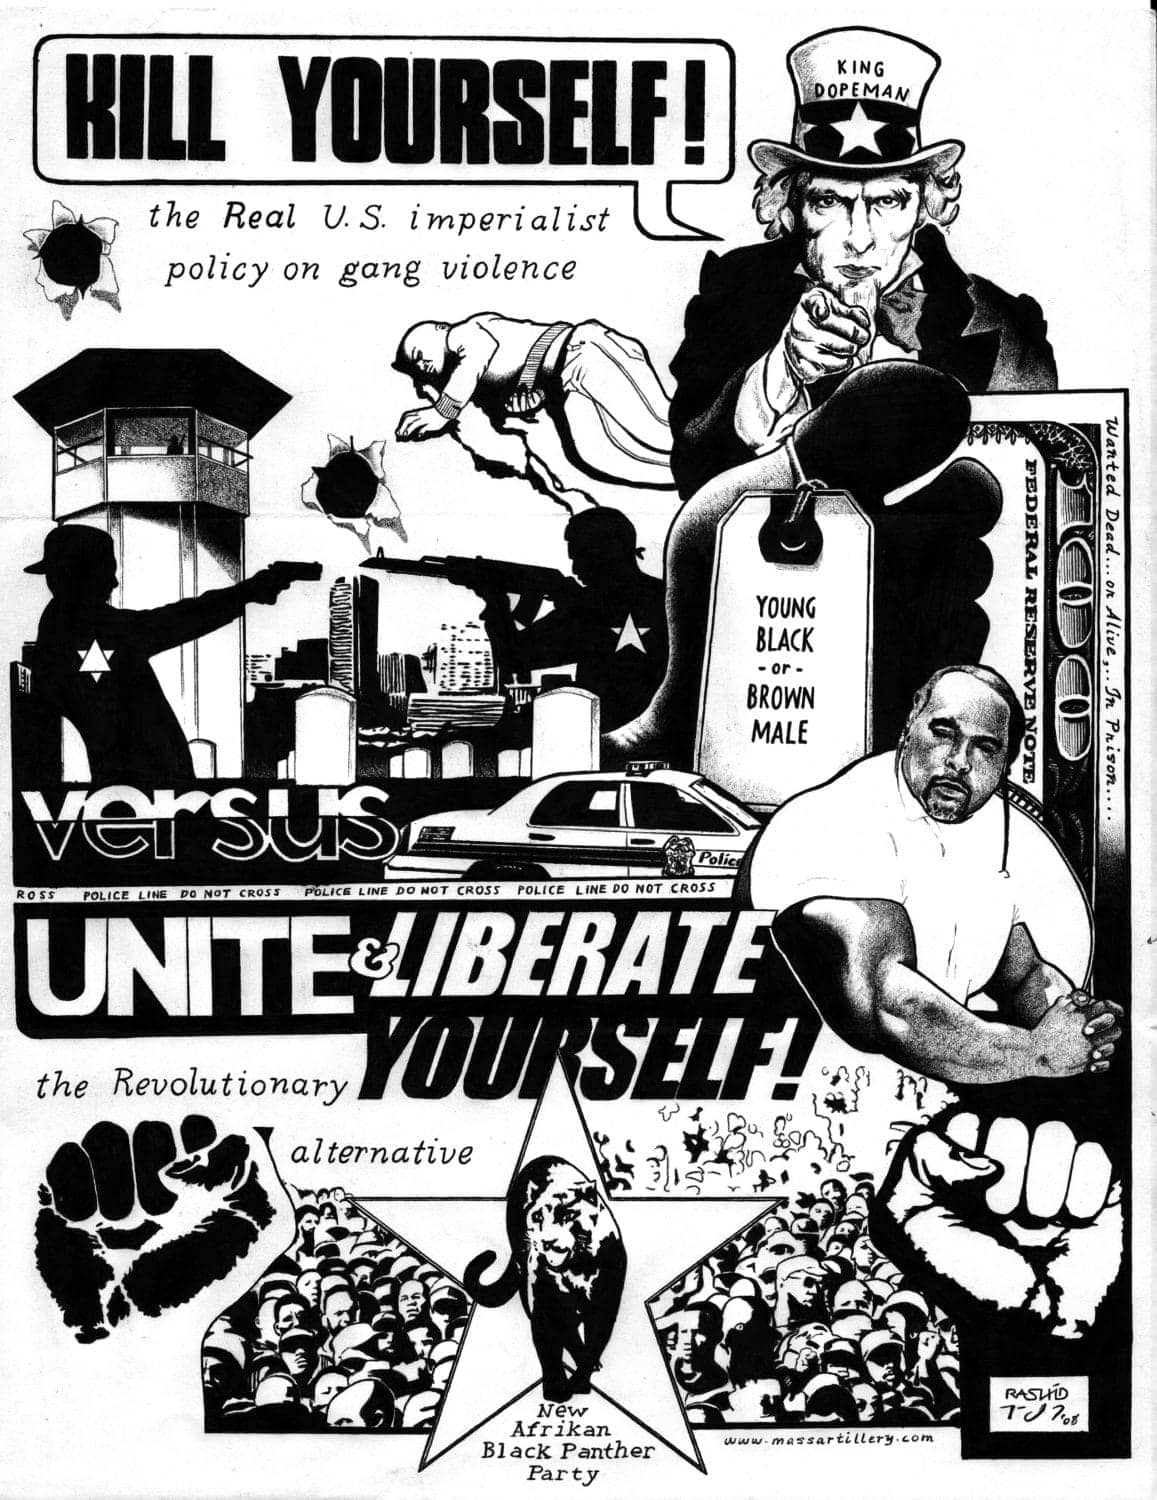 Kill-Yourself-versus-Unite-Liberate-Yourself-art-by-Rashid-2008, Blood in the Clenched Fist Alliance, Abolition Now! 